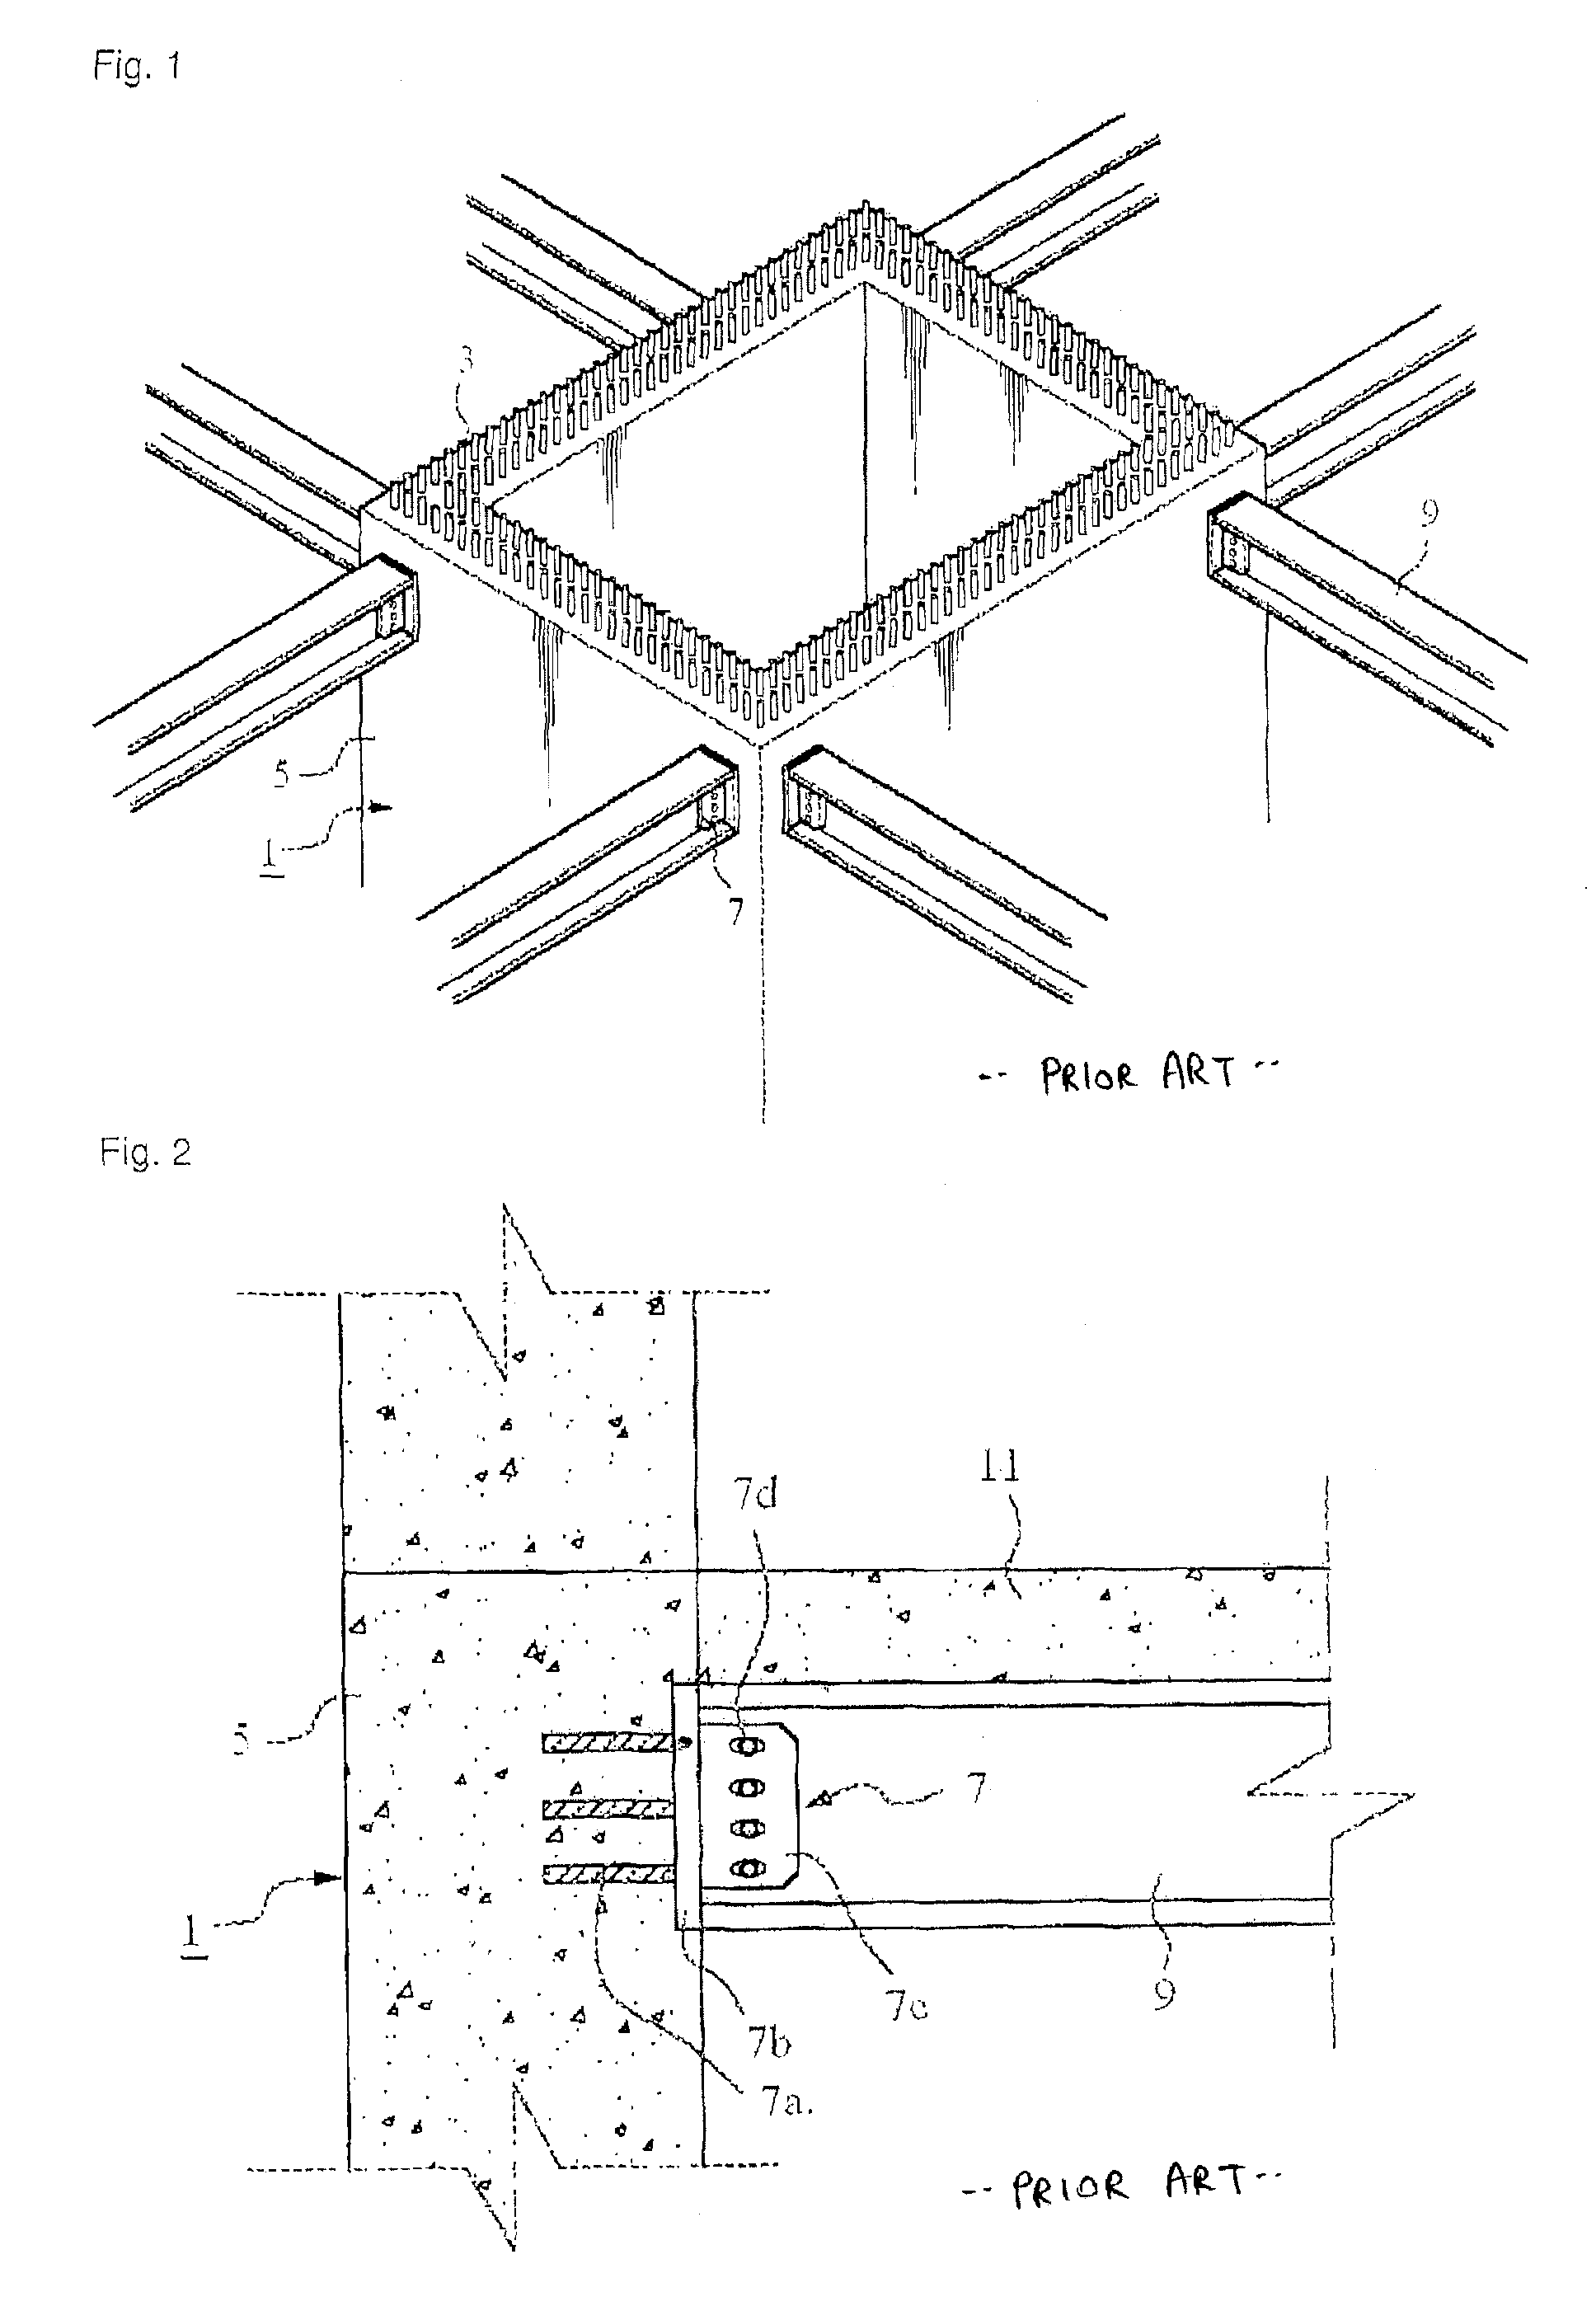 Structure for constructing a high-rise building having a reinforced concrete structure including a steel frame